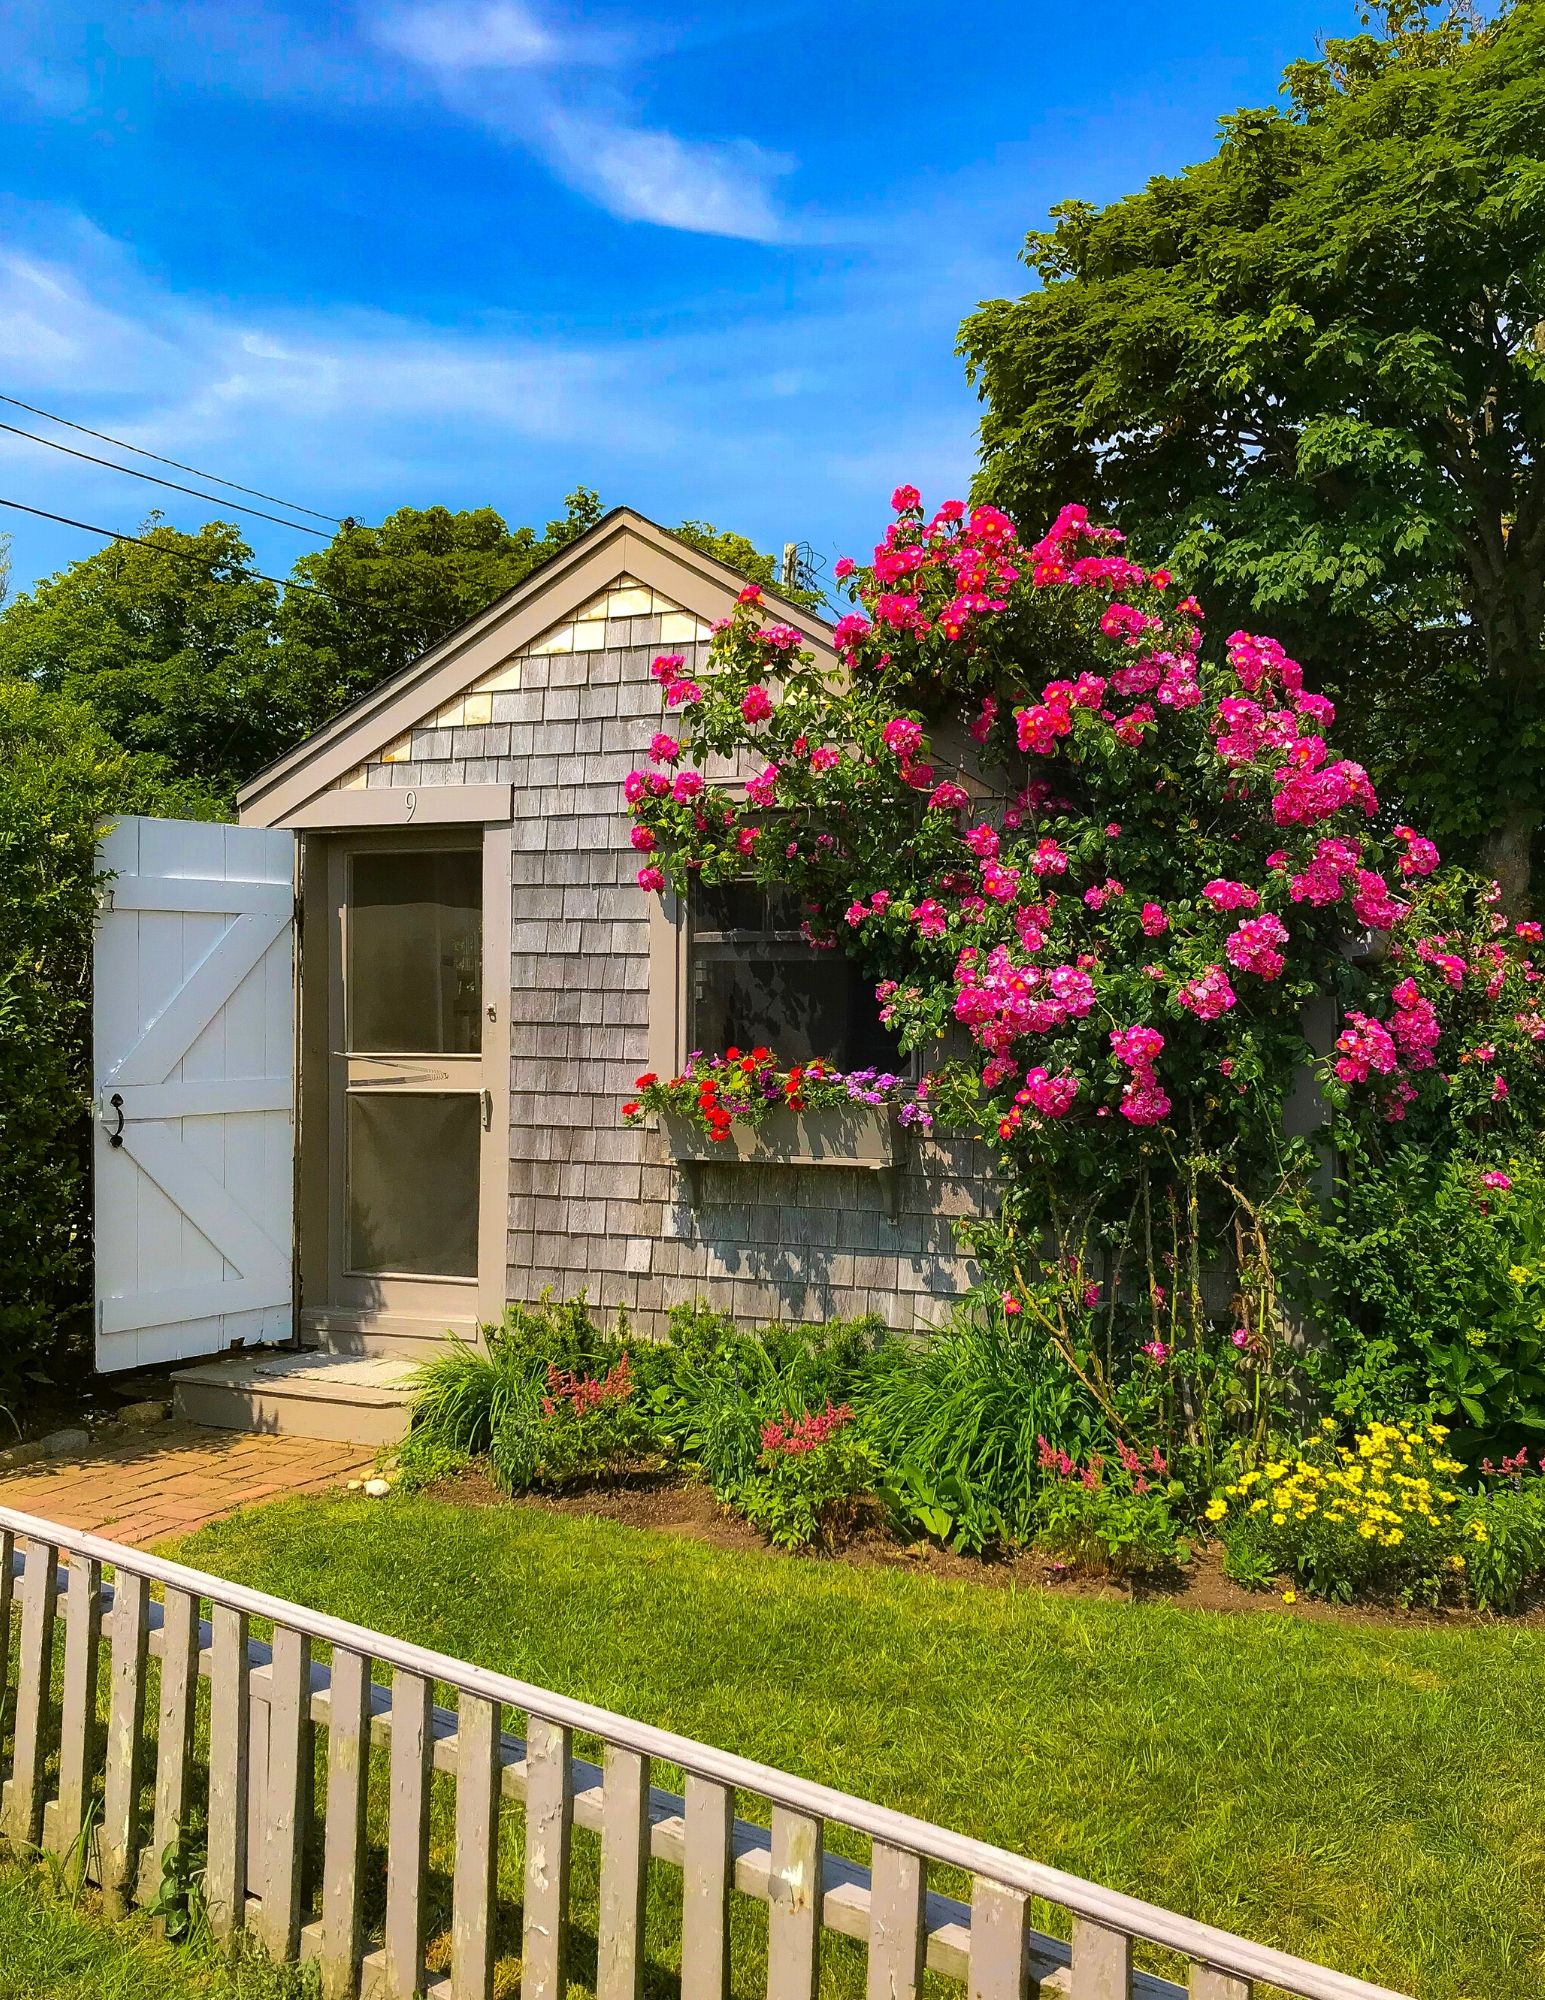 Nantucket Rose Covered Cottages in Sconset-3